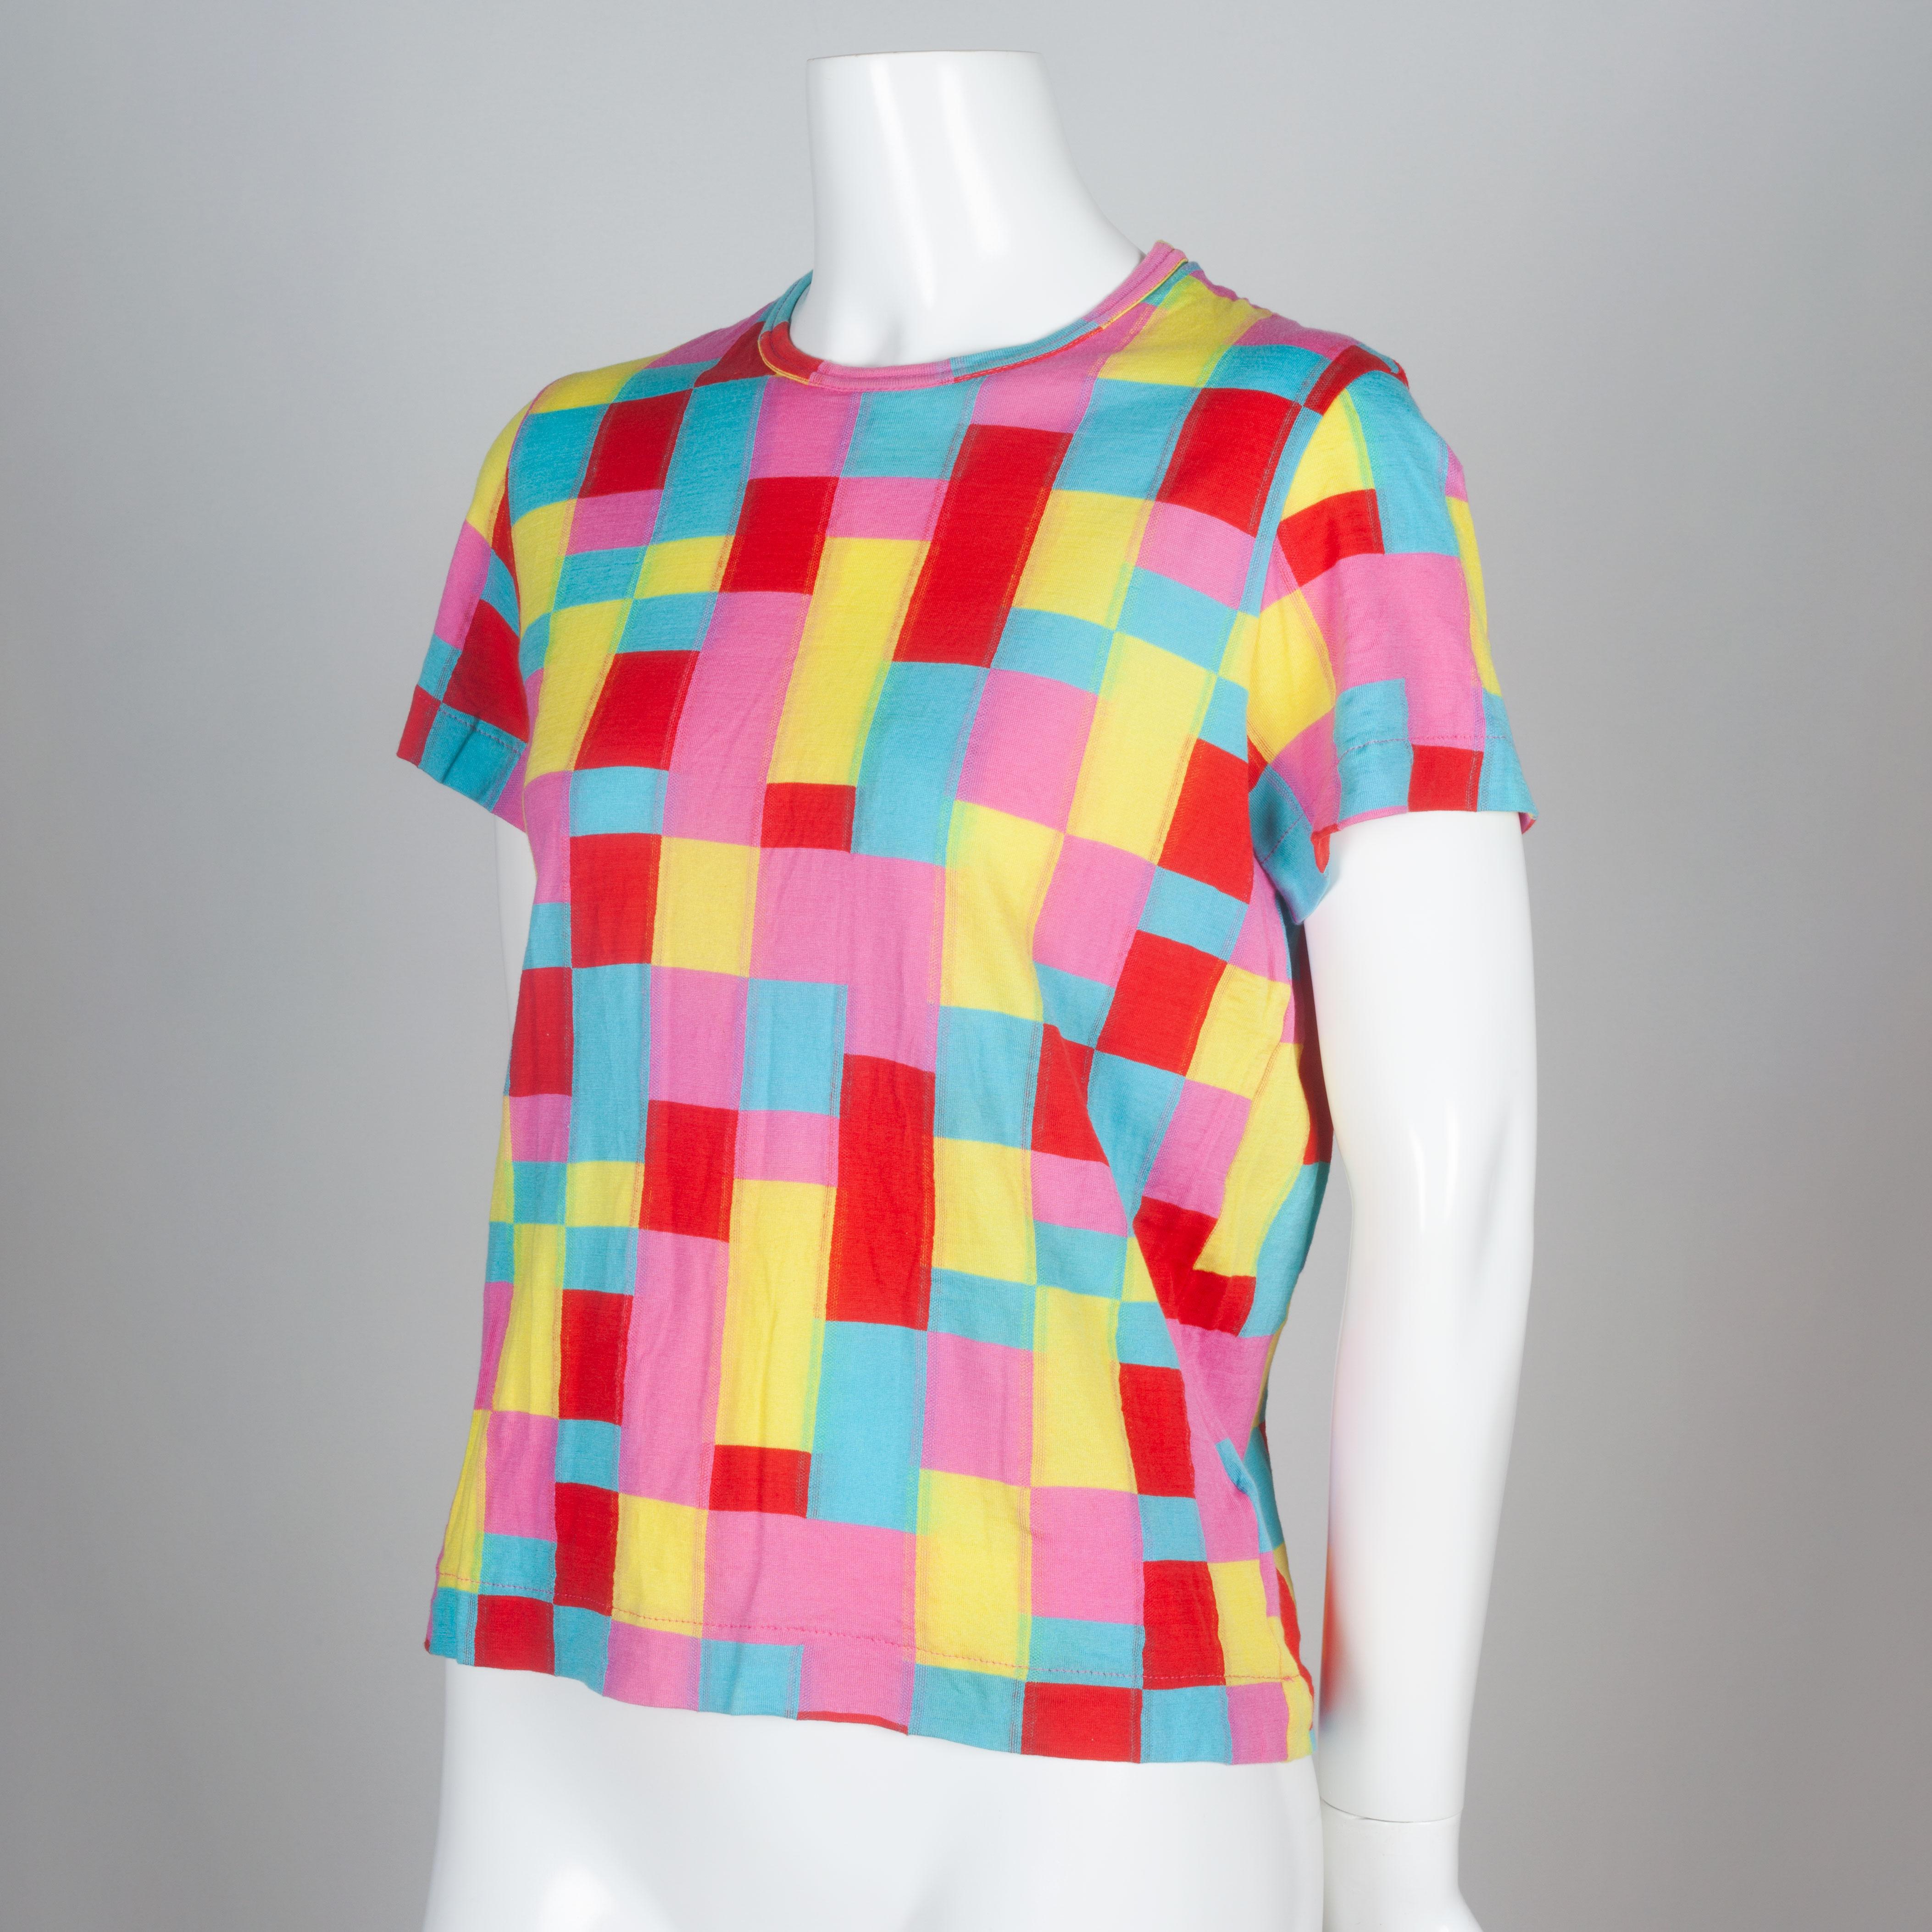 Comme des Garçons Tricot 2001 multi-color, checkered knit cotton t-shirt. Deconstructed blocks of colorful confetti motif.Pop colors and the weaving at the outer edges of the checkered patches give a glitch effect that capture the mood of the